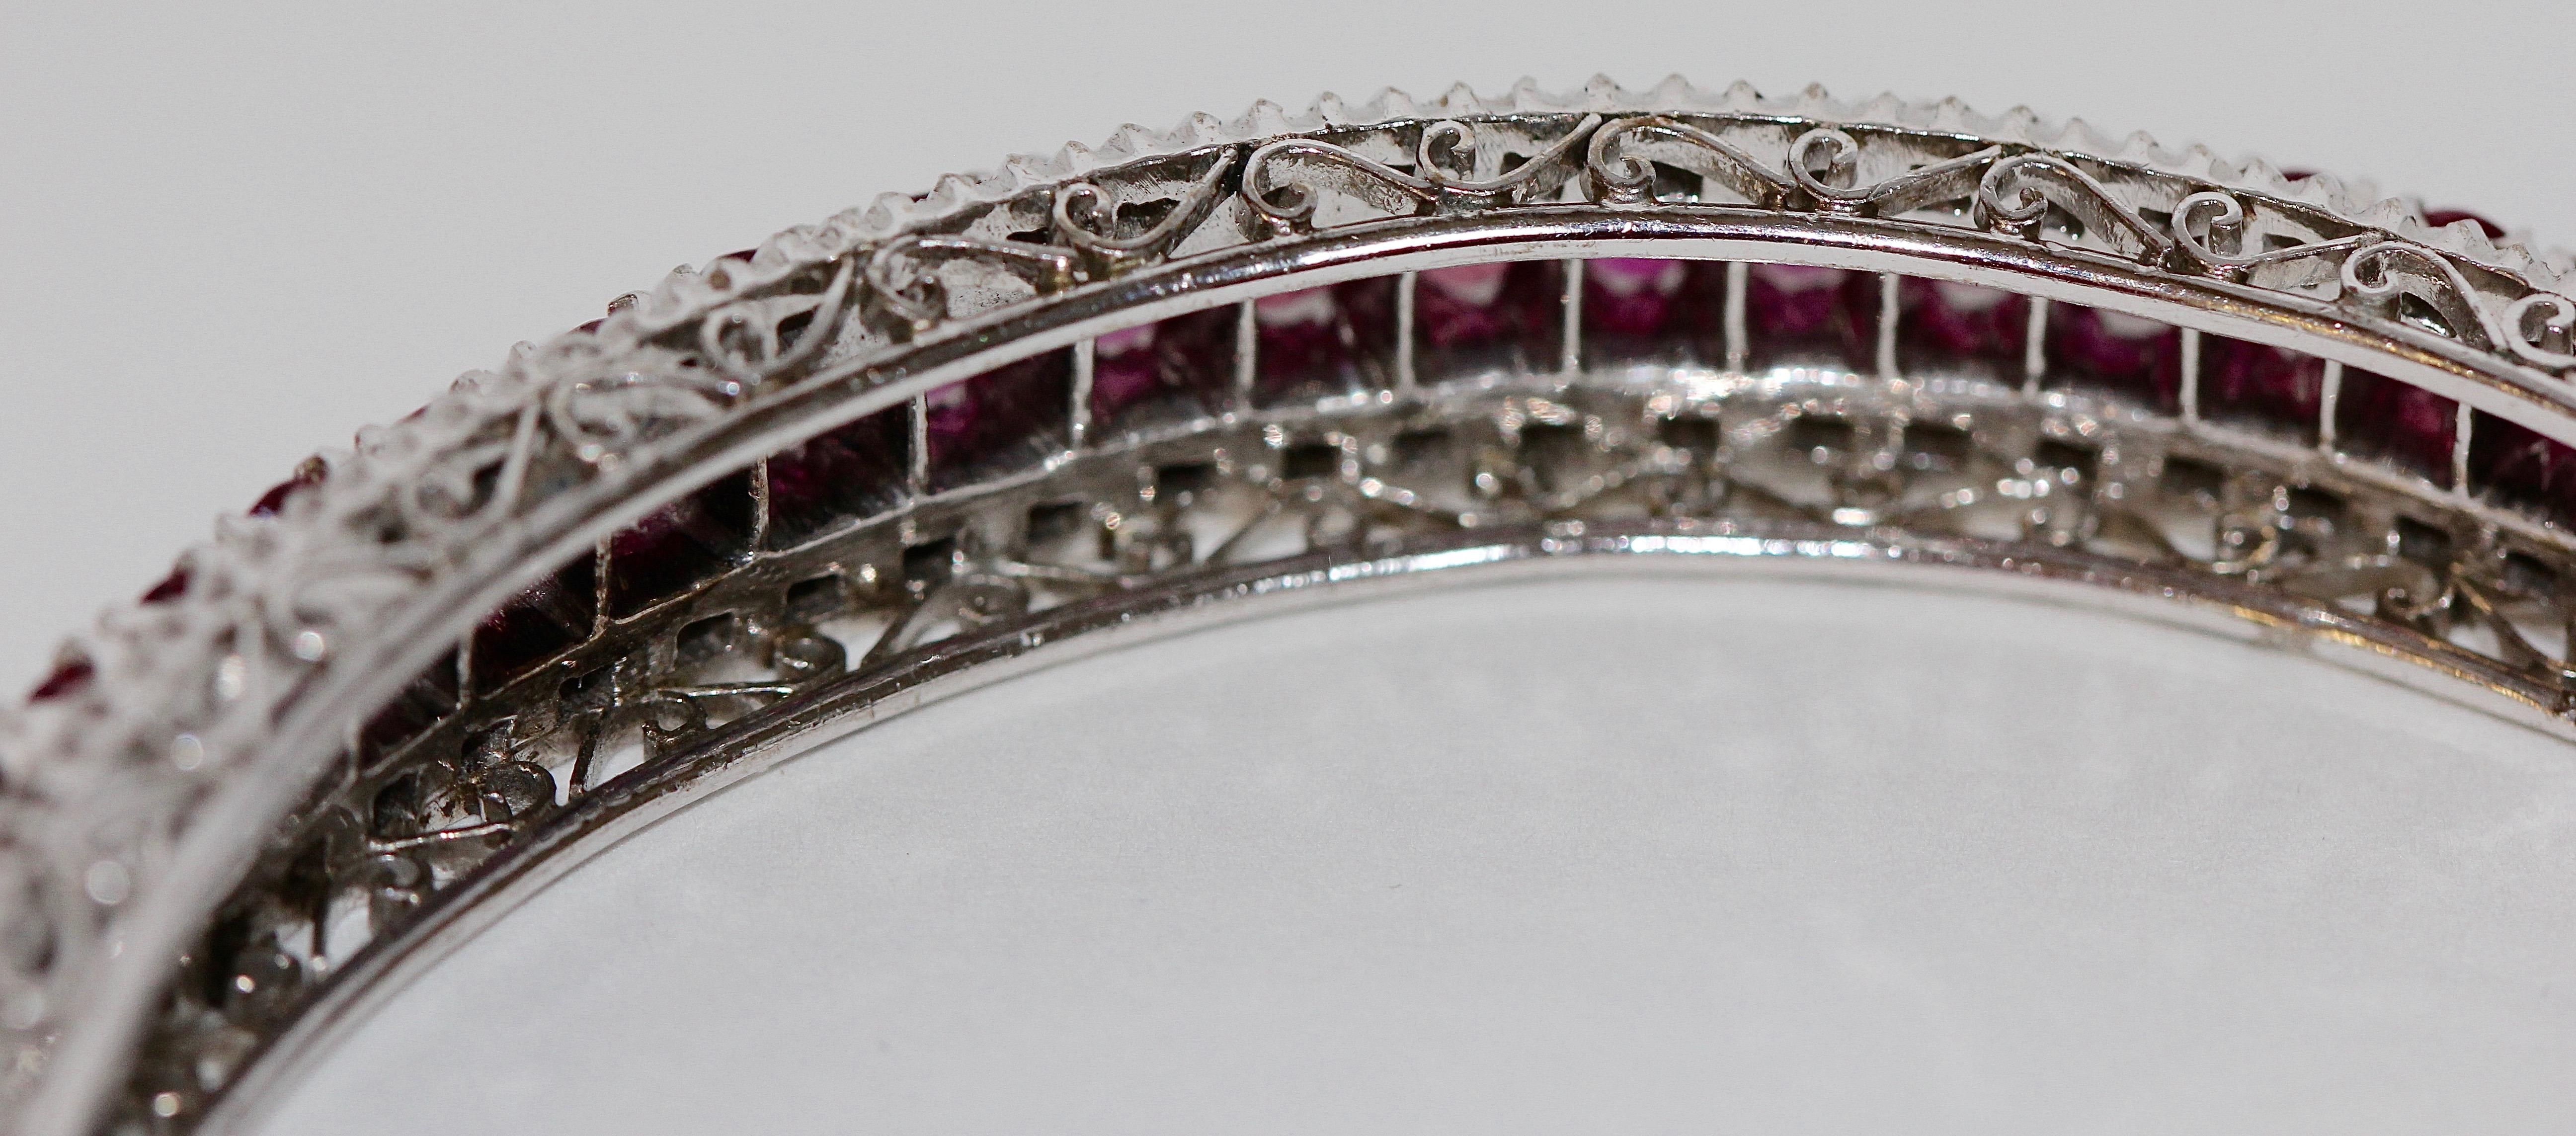 14 Karat White Gold Bracelet Bangle Set with Lots of Rubies and Tiny Diamonds For Sale 4